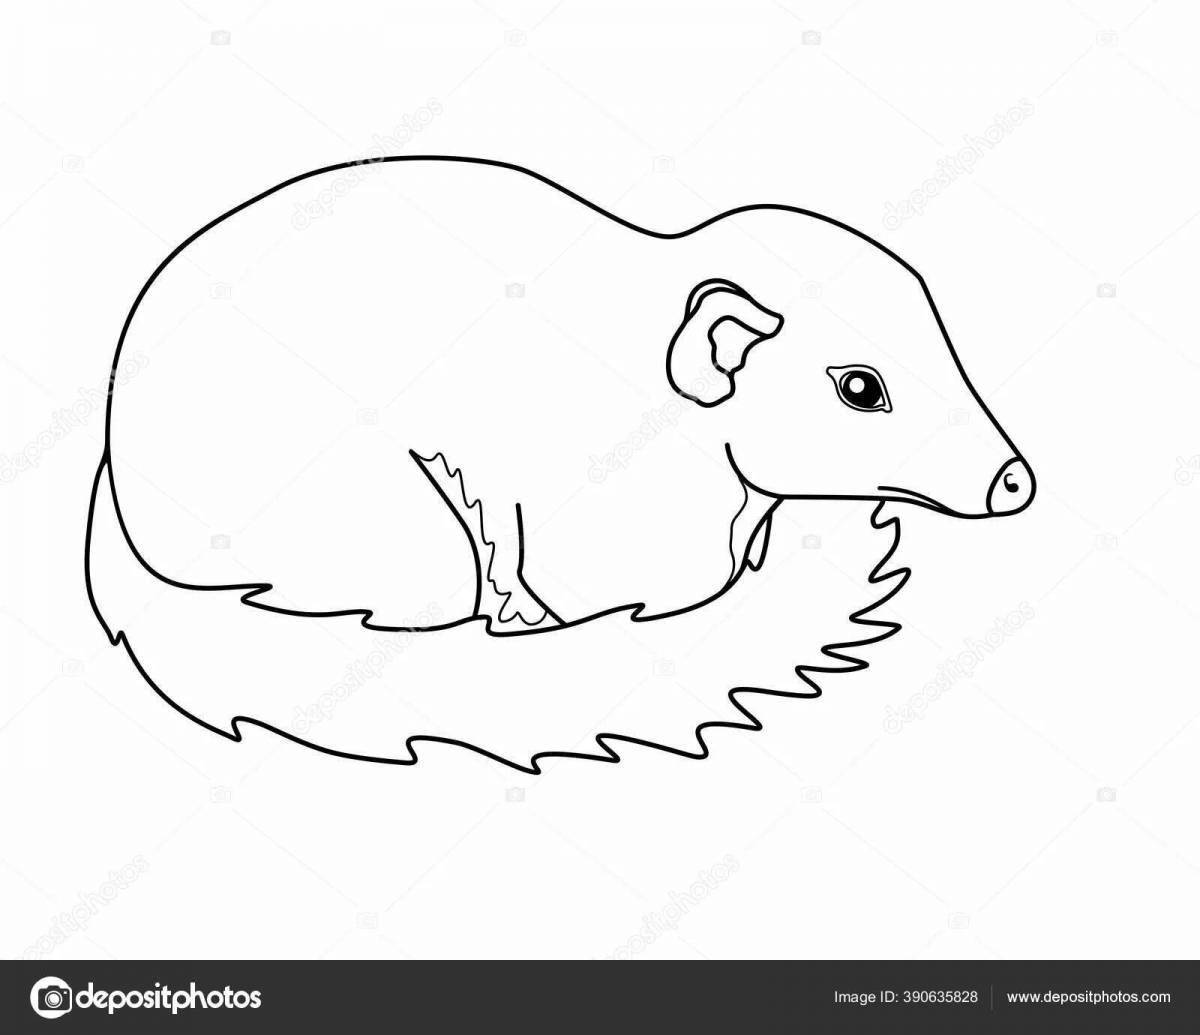 Playful shrew coloring for kids